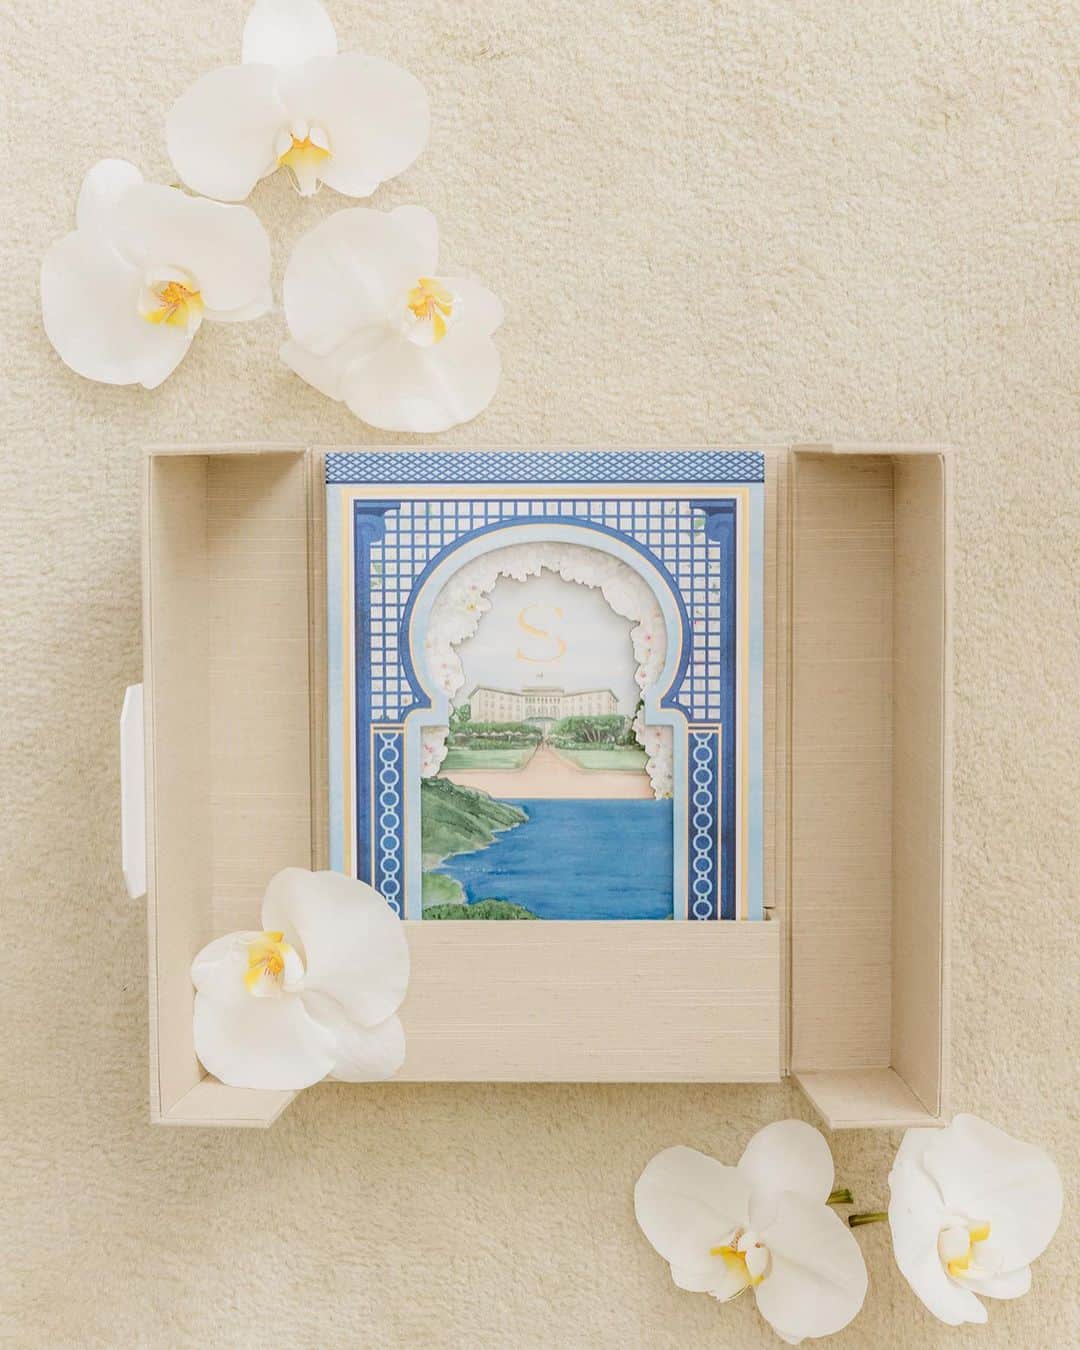 Ceci Johnsonのインスタグラム：「WEDDING | Presenting a closer look at this couture invitation inspired by the Four Seasons Cap-Ferrat, France –S&A’s wedding venue. Outside, the box is hand wrapped in neutral linen, opening to reveal a book invitation that invites guests on a journey to celebrate their love. The book’s cover features a hand painted 3D watercolor art depiction of their wedding venue. Each page inside is a canvas inspired by the locations of their welcome party at @yachtclubmonaco, white-orchid wedding, and poolside brunch at @fscapferrat. To complement this couture experience, a matching welcome booklet has been crafted, incorporating a tassel for an added touch of refinement.  #CeciCouture ⠀⠀⠀⠀⠀⠀⠀⠀⠀ CREATIVE PARTNERS: Luxury Invitation & Event Branding: @cecinewyork Planning & Design: @lavenderandroseweddings Welcome Party Venue & Catering: @yachtclubmonaco Wedding Venue & Catering:  @fscapferrat Photography: @daniloandsharon ⠀⠀⠀⠀⠀⠀⠀⠀⠀ #cecinewyork #ceciwedding #lavenderandroseweddings #luxuryinvitations #elegantdesigns #coutureinvites #opulentdetails #bespokeinvitations #chiccelebrations #artistryininvitations #highenddesigns #luxurystationery #premiuminvitations #exquisitedetails #invitationelegance #celebrateinstyle #glamorousinvites #luxurycelebrations #finestationery #customizedelegance #celebrationperfection #invitationcouture #elevateyourevent #luxuryeventplanning」